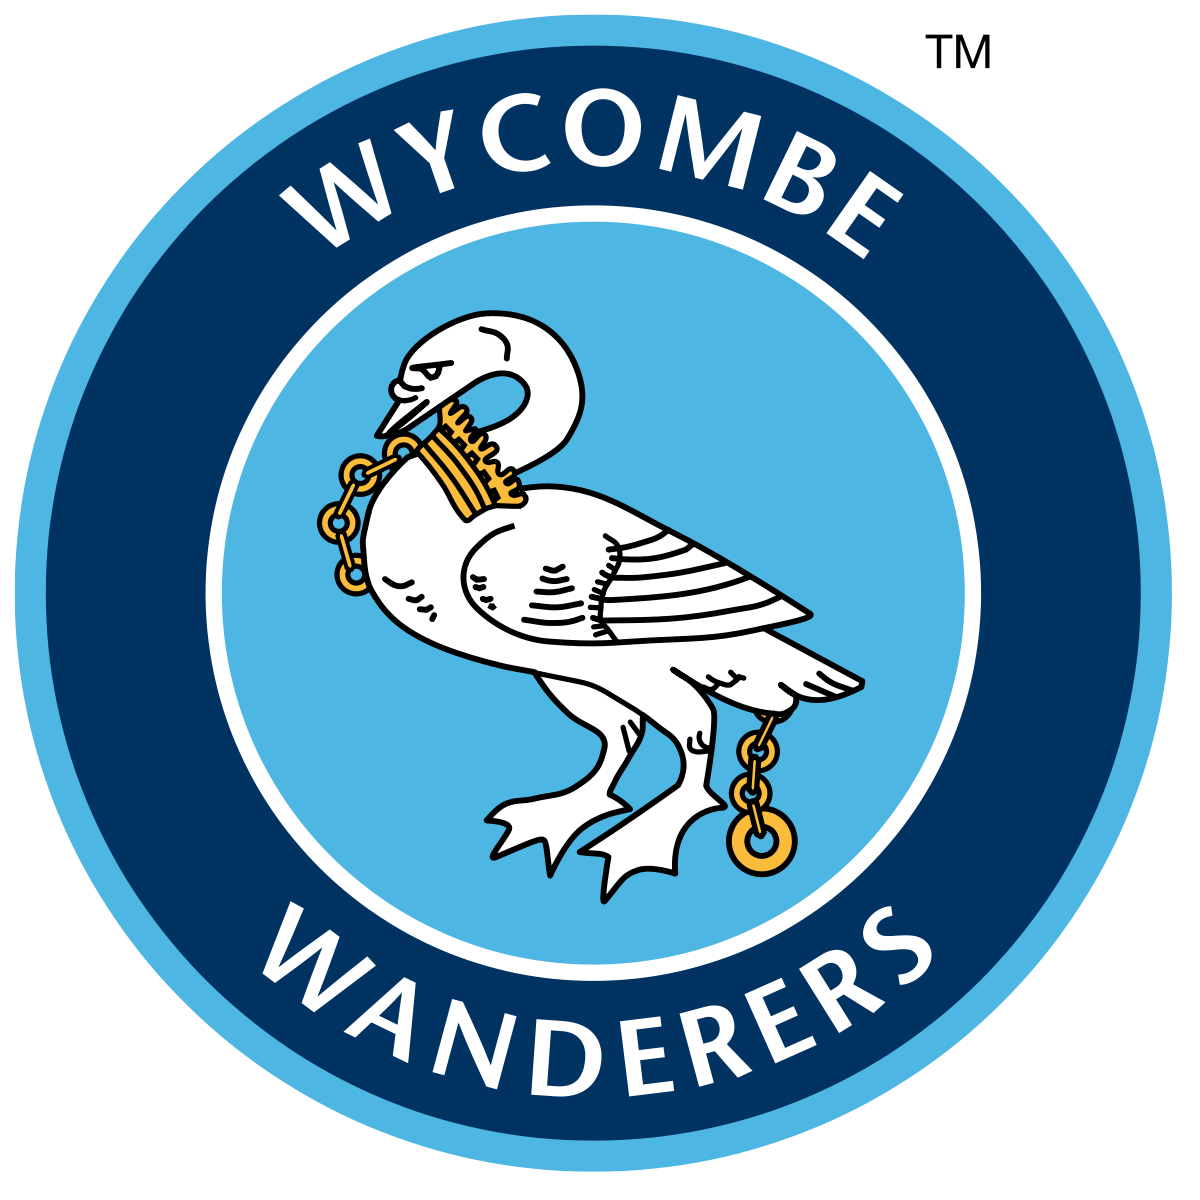 1200px-Wycombe_Wanderers_FC_logo.svg.png